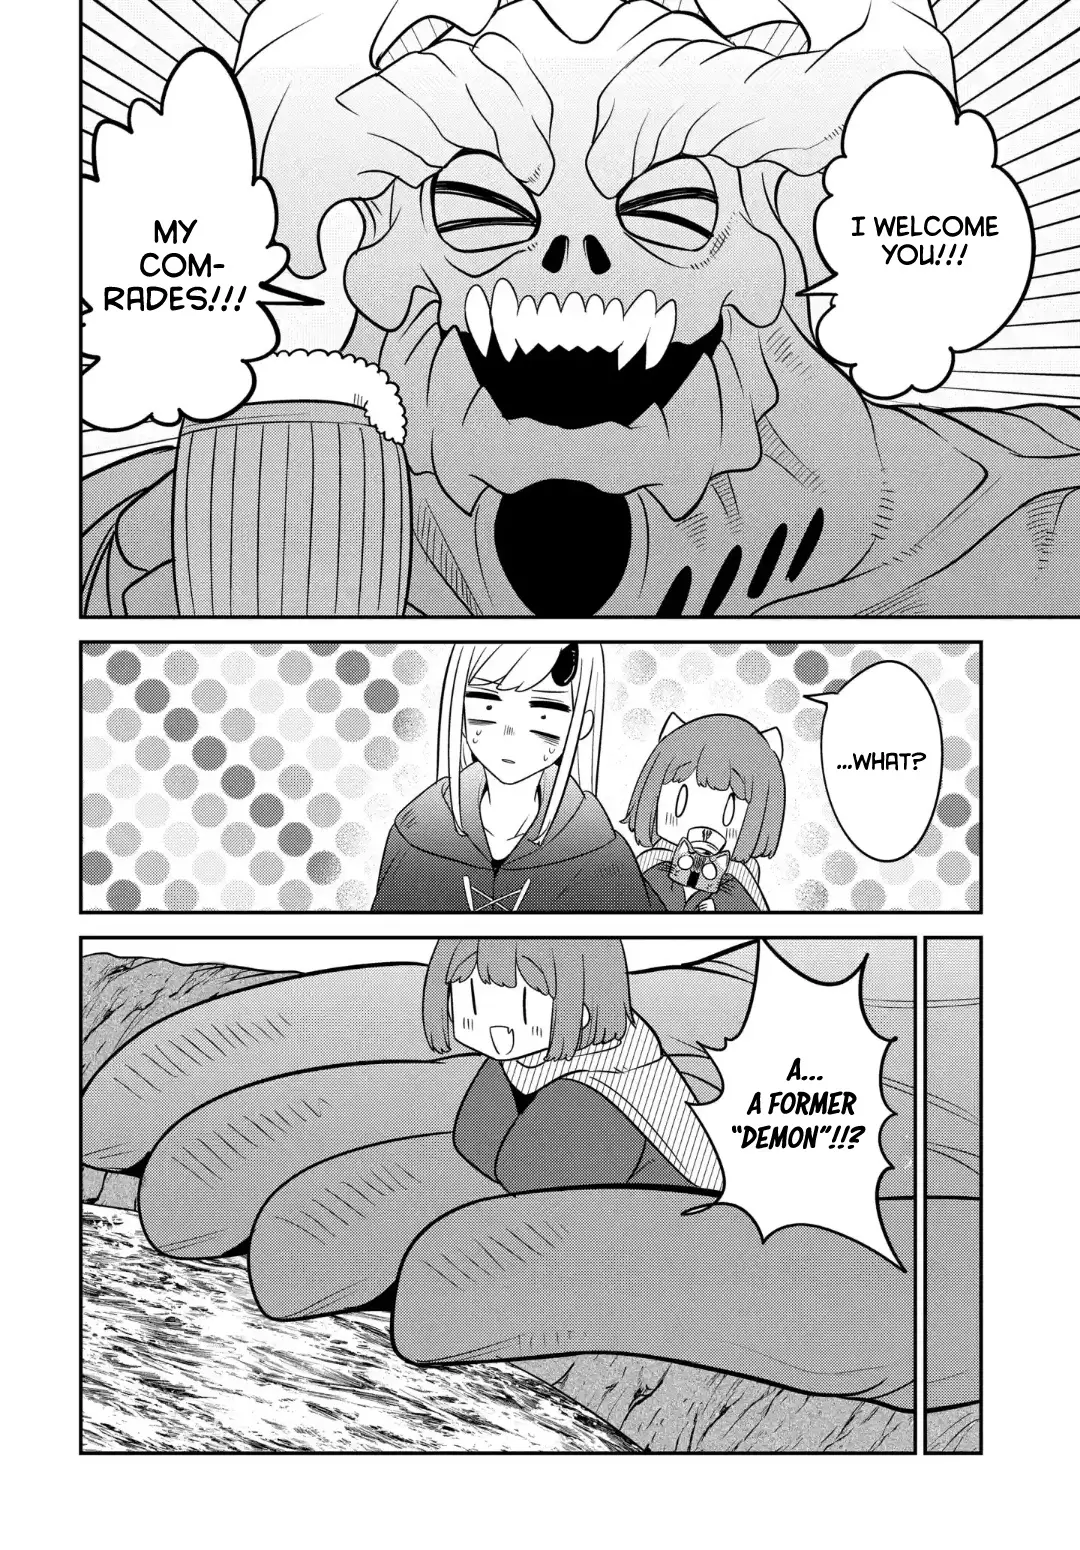 The Demon King’S Daughter Is Too Kind - 28 page 5-0fe844df